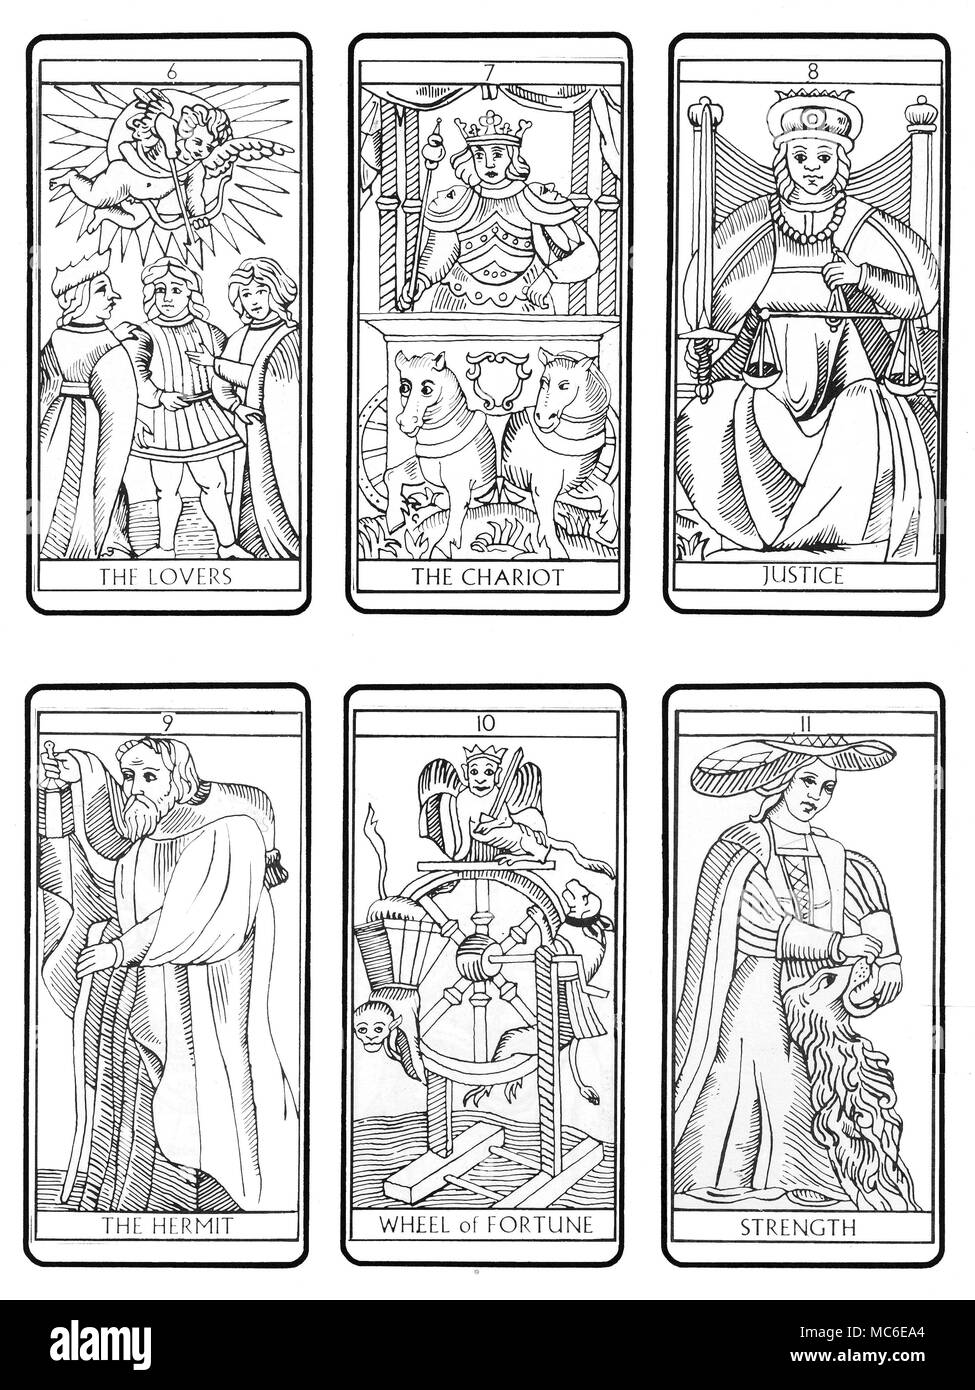 TAROT CARDS - MARSEILLES DECK The second six of the sequence of 22 Tarot cards (according to the traditional Marseilles design), from the sixth card (The Lovers), through The Chariot, The Justice, The Hermit, The Wheel of Fortune and Strength. The remaining sequences are available, in batches of 6. Stock Photo